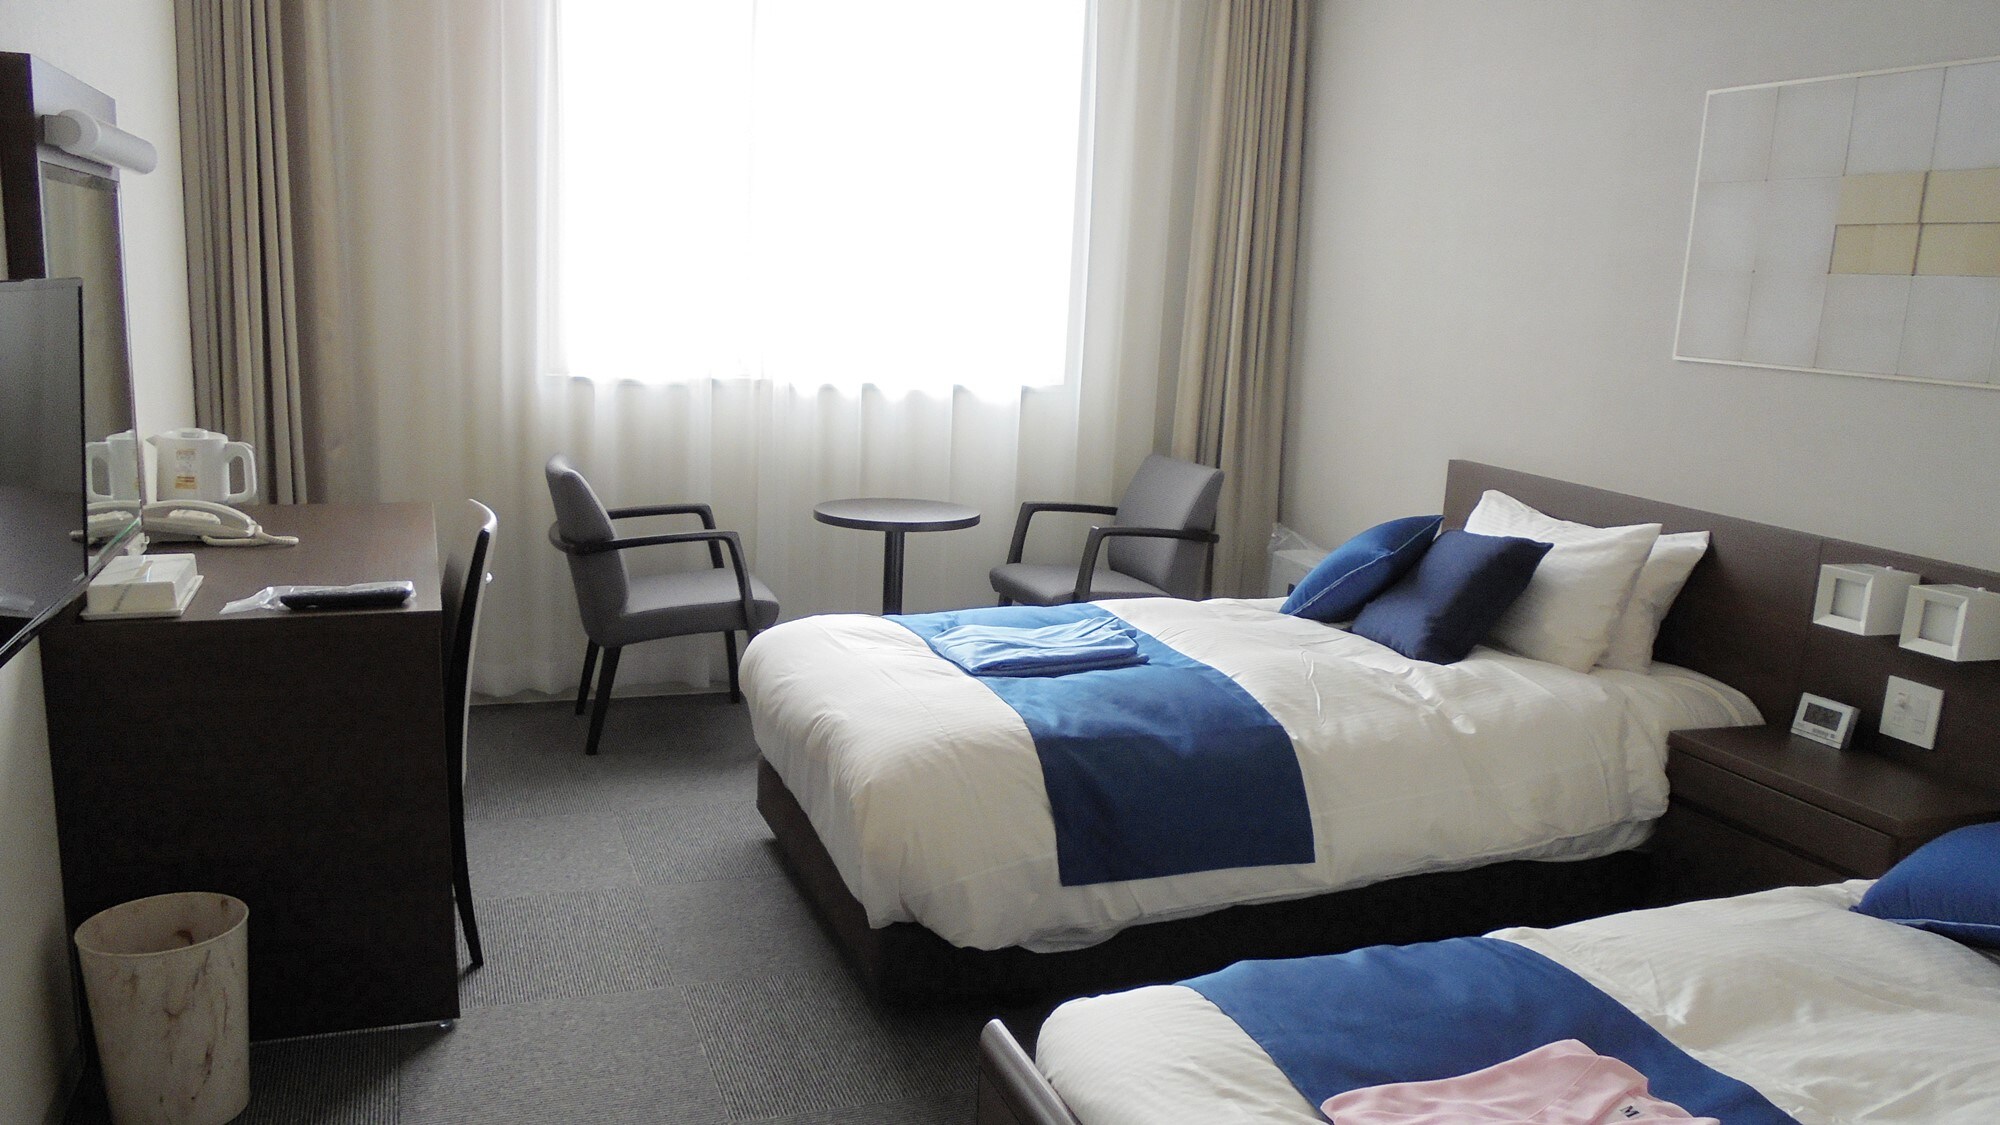 * Economy room example / One bed in each room is equipped with an electric reclining bed.